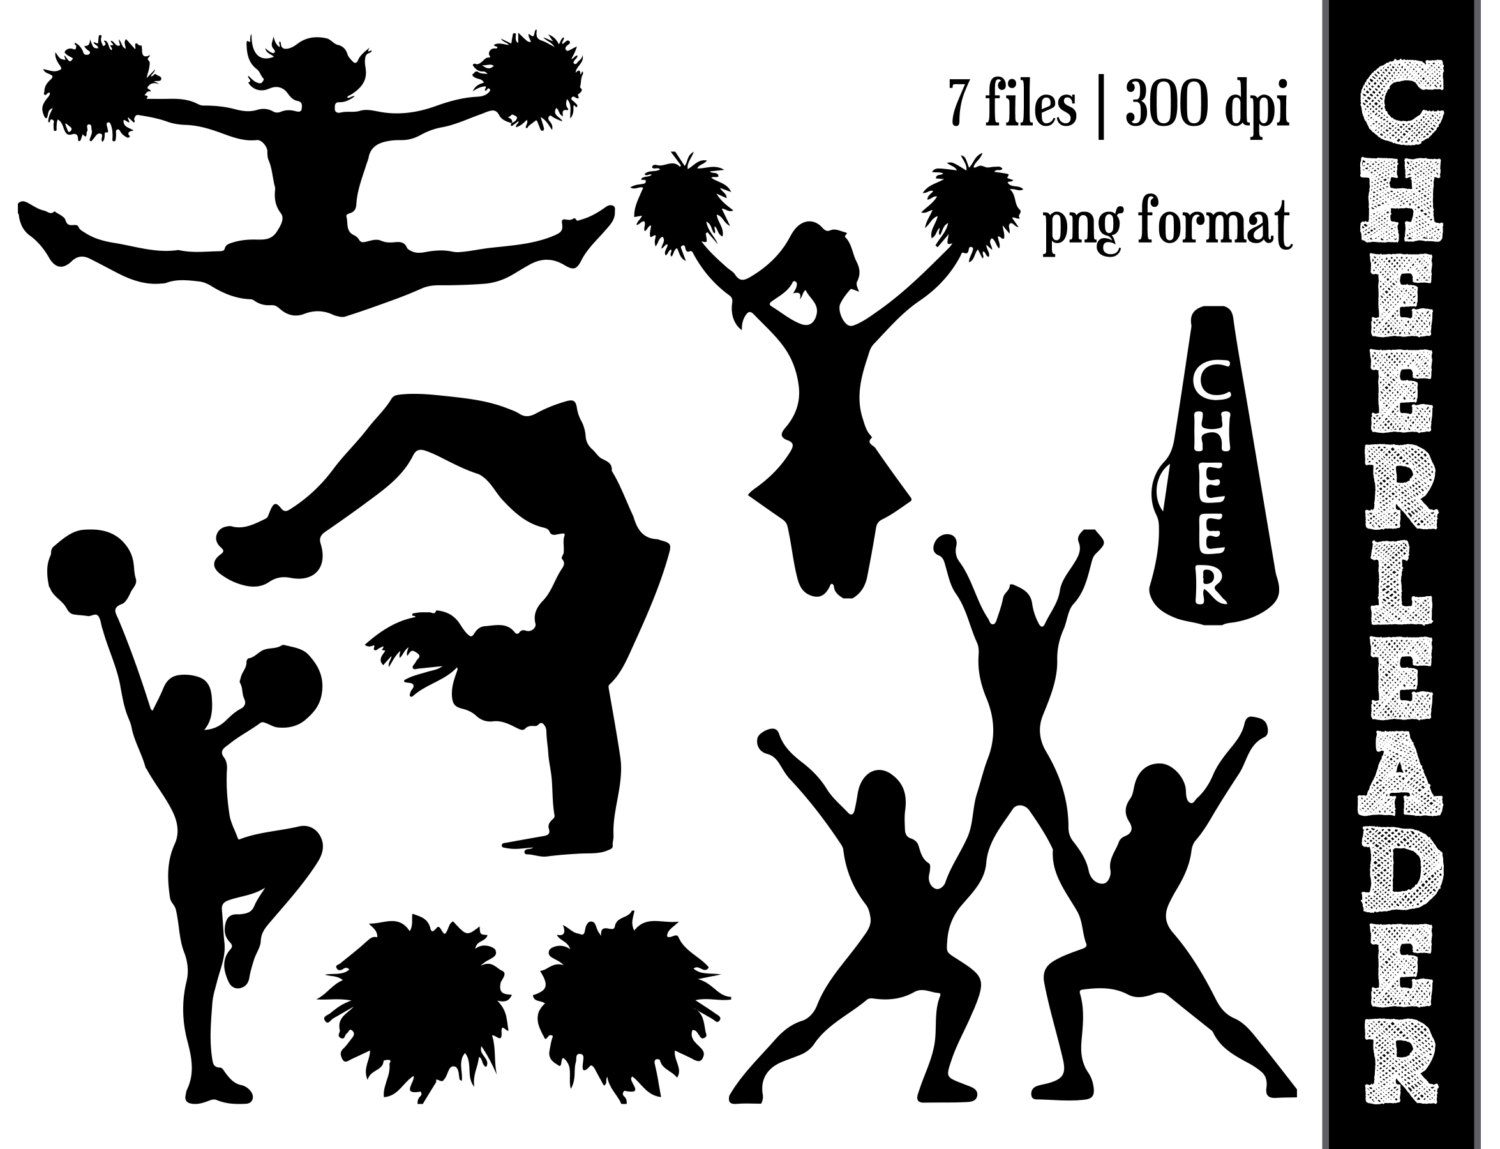 Cheerleader Silhouettes    Cheer Silhouette By Sparkyourcreativity